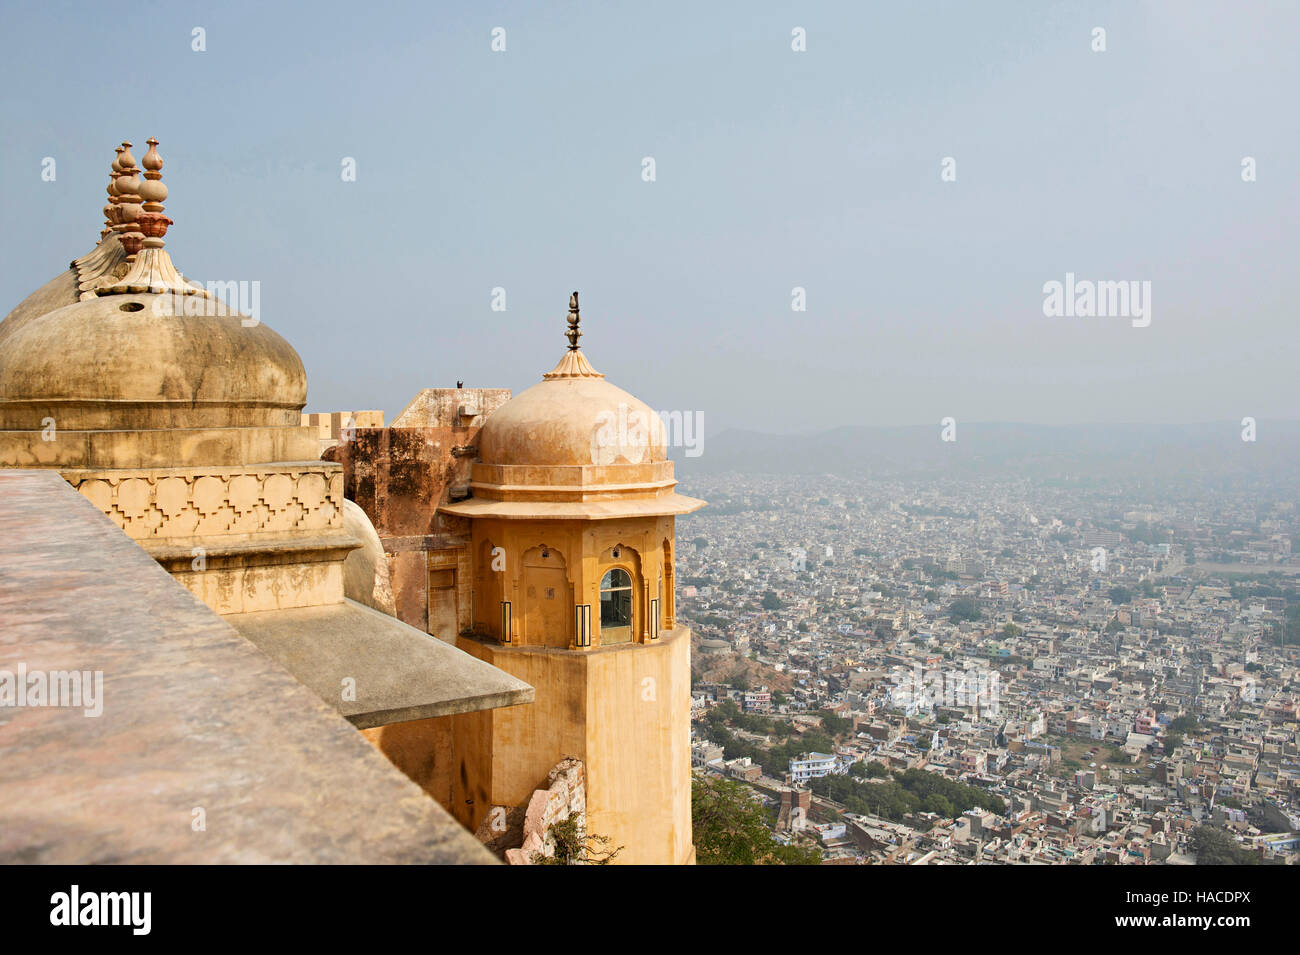 View of Jaipur city from Nahargarh, Rajasthan, India Stock Photo